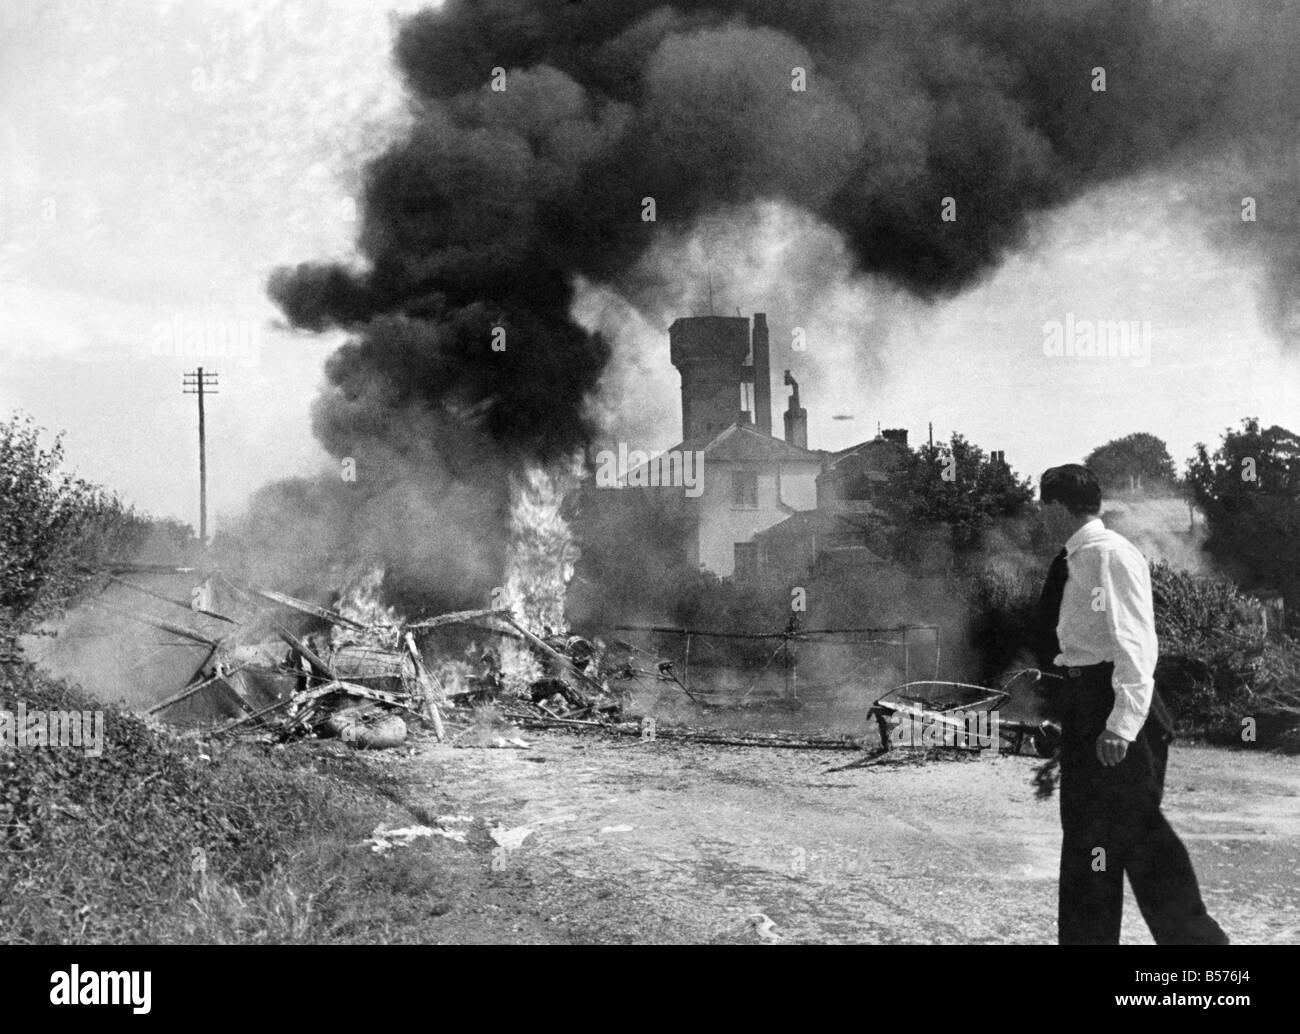 Blazing plane crash. An aeroplane with seven passengers abroad, crashed and burst into flames a few minutes after taking off from Heston Aerodrome for the King's Review of the Fleet at Spithead. Two of the pasengers died and four other passengers and the pilot injured. Our Picture Shows: The blazing wreckage of the machine. July 1935 P003924 Stock Photo